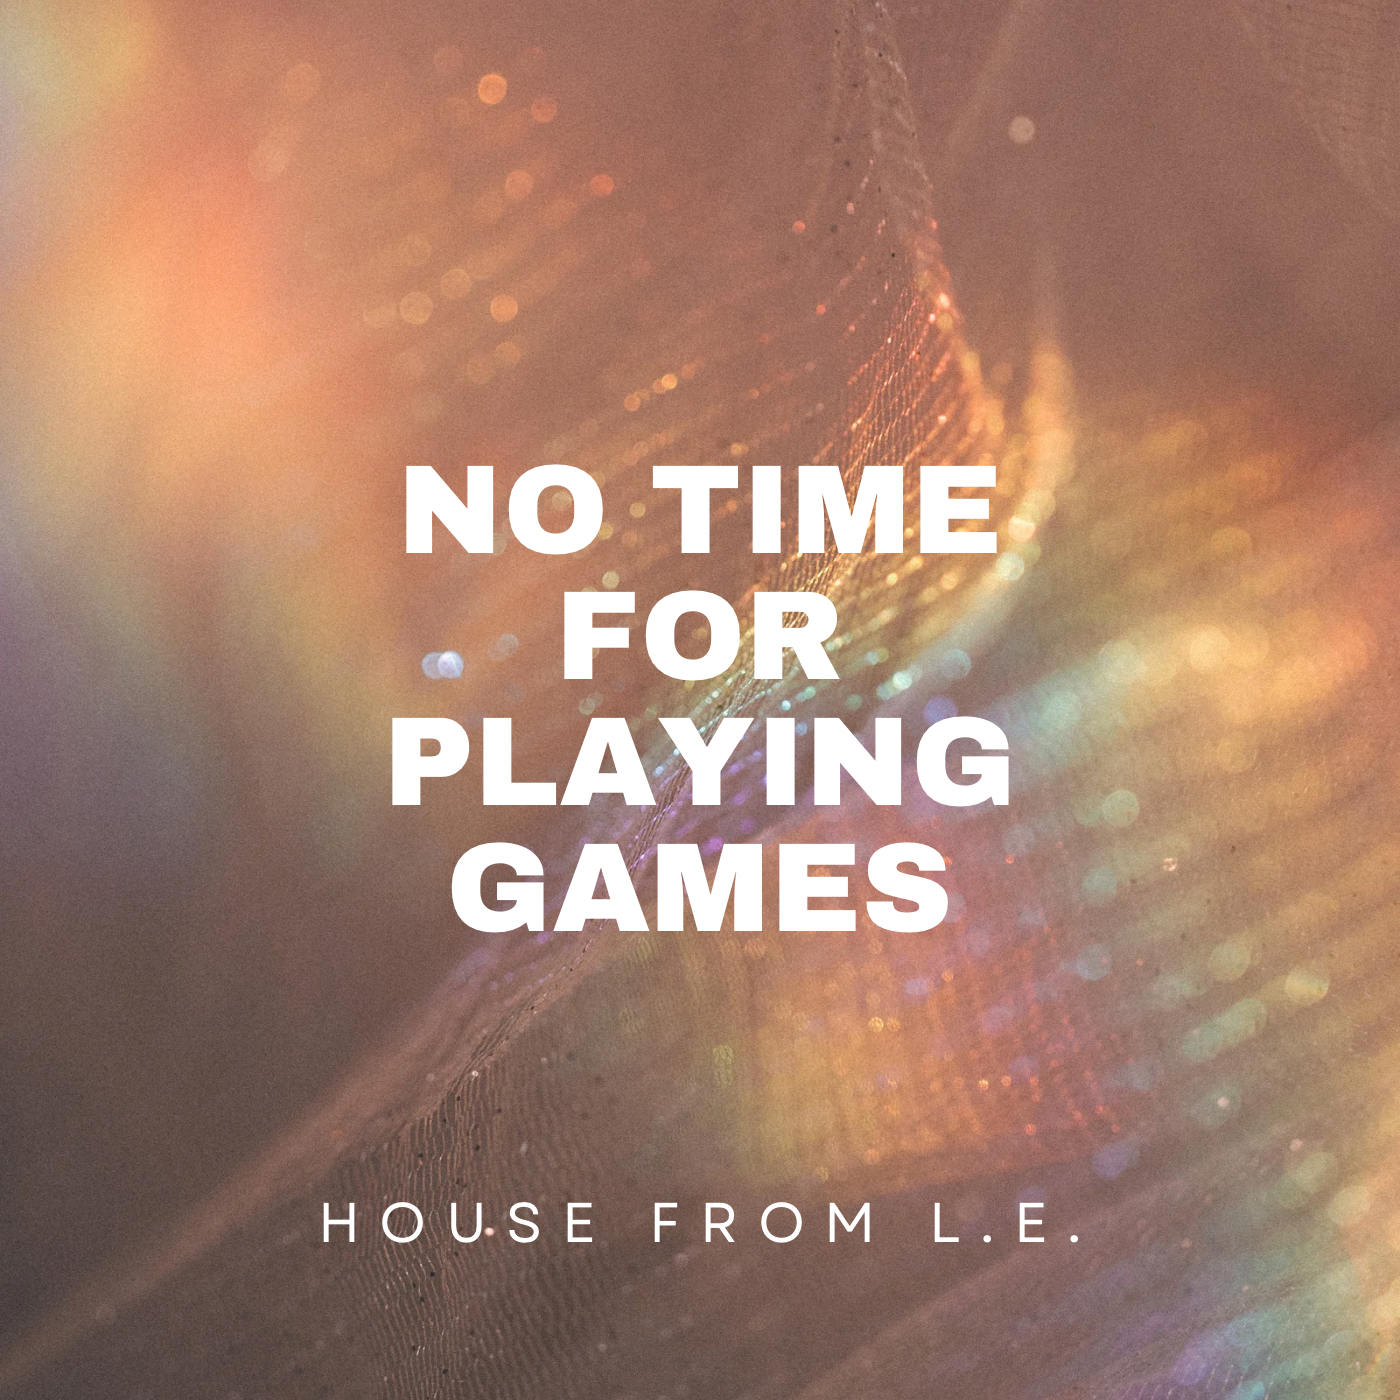 House from L.E. – “No Time for Playing Games”